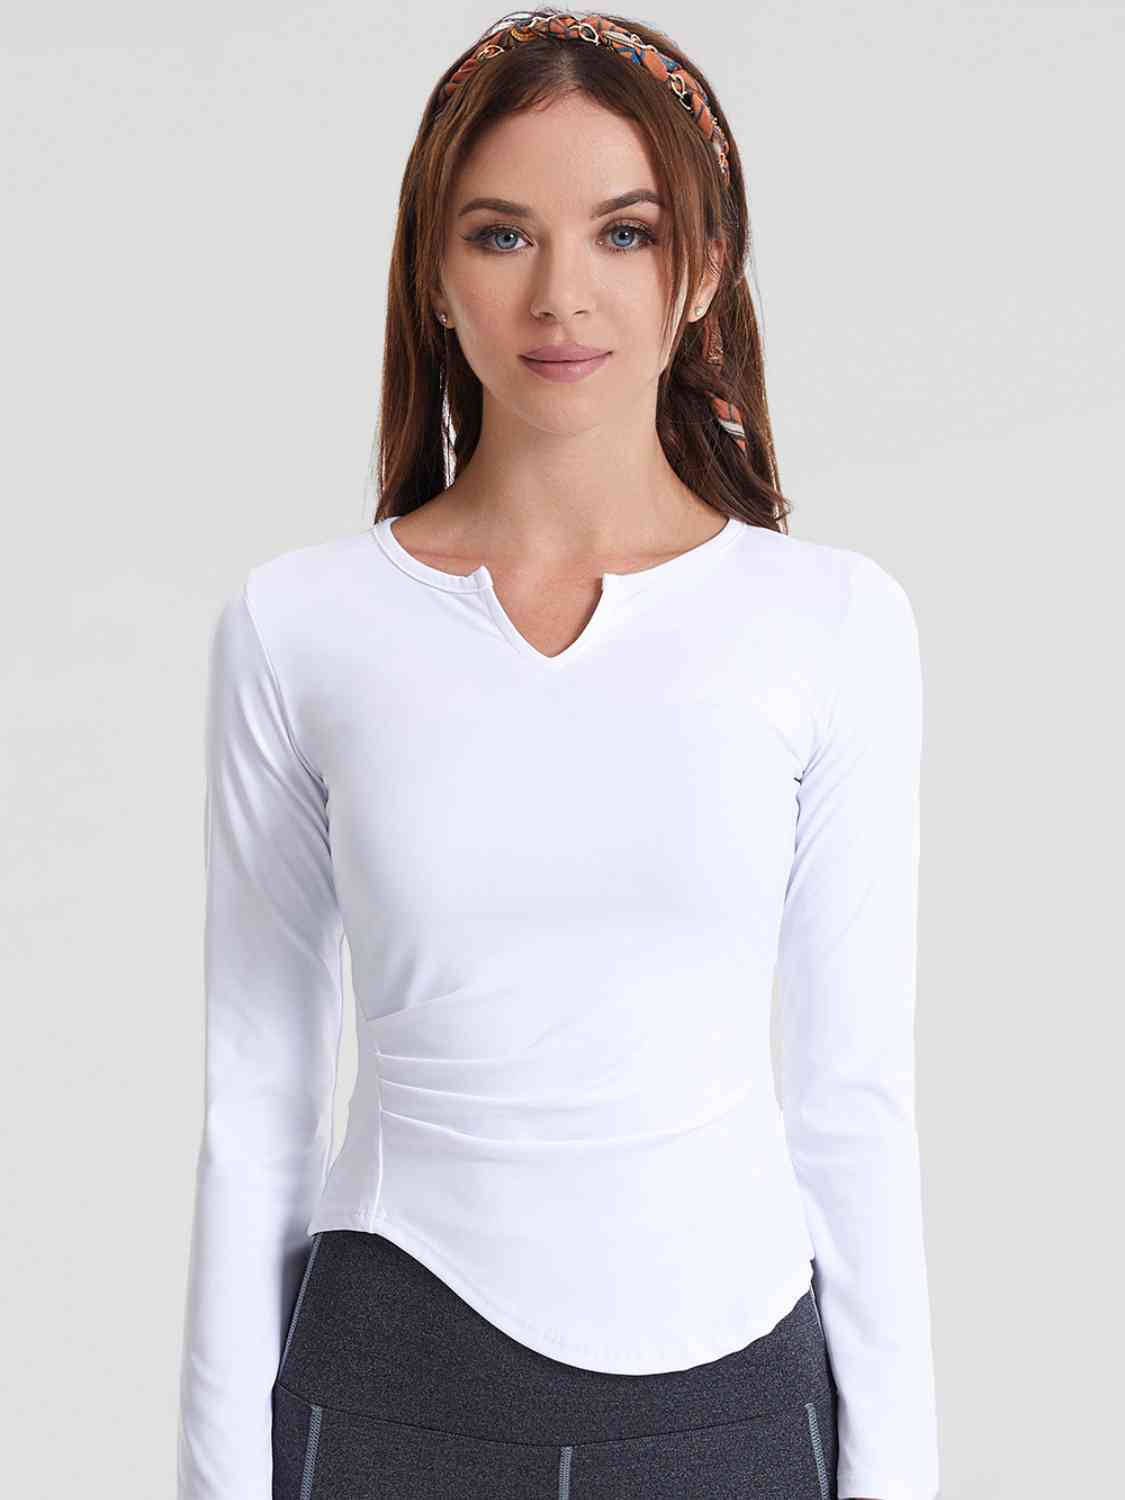 Notched Neck Ruched Sports Top - Sufyaa